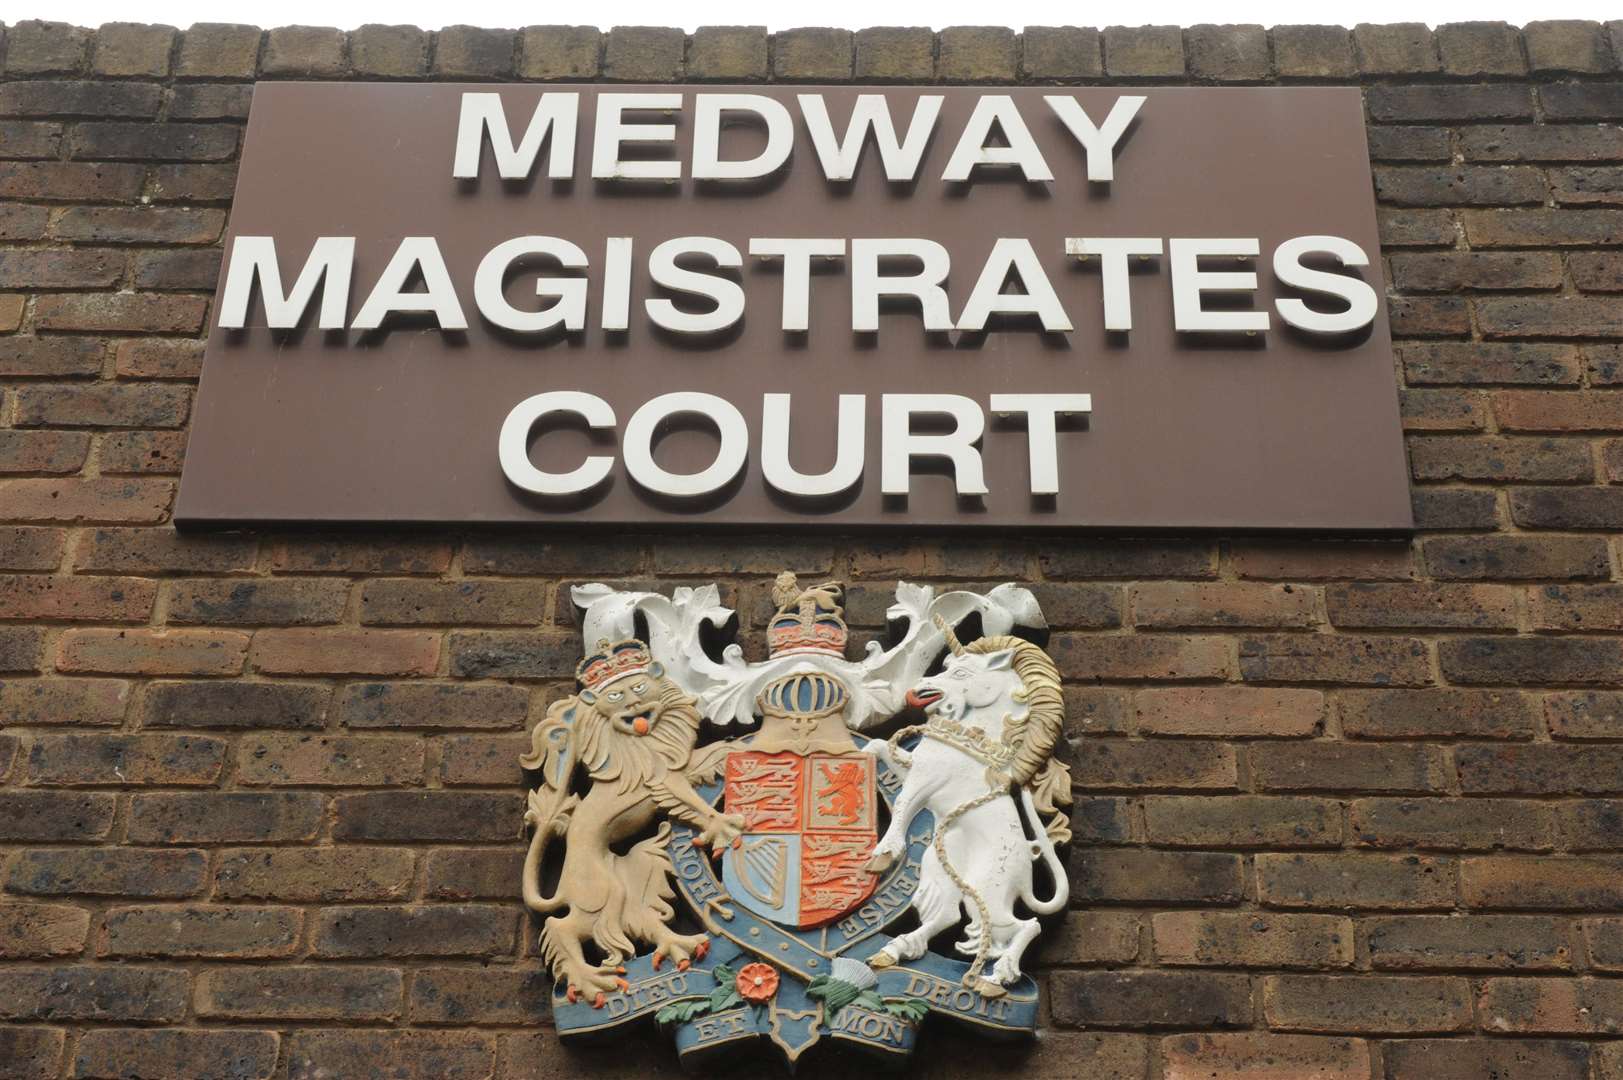 Medway Magistrates Court, Chatham